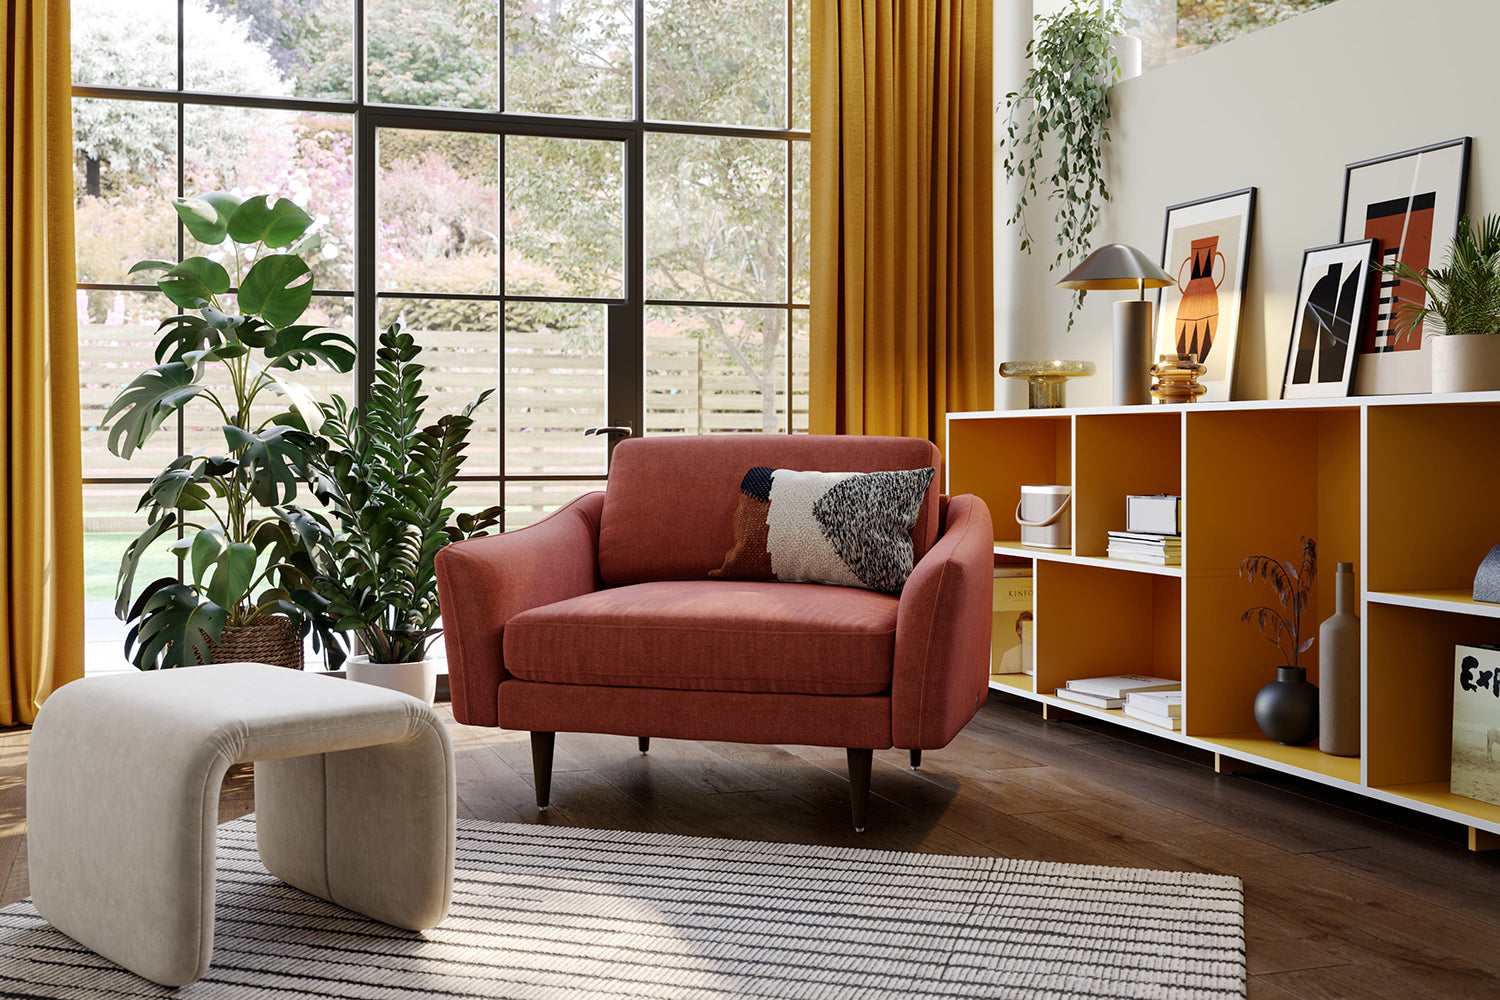 The Rebel Snuggler Sofa in Spice with brown legs lifestyle